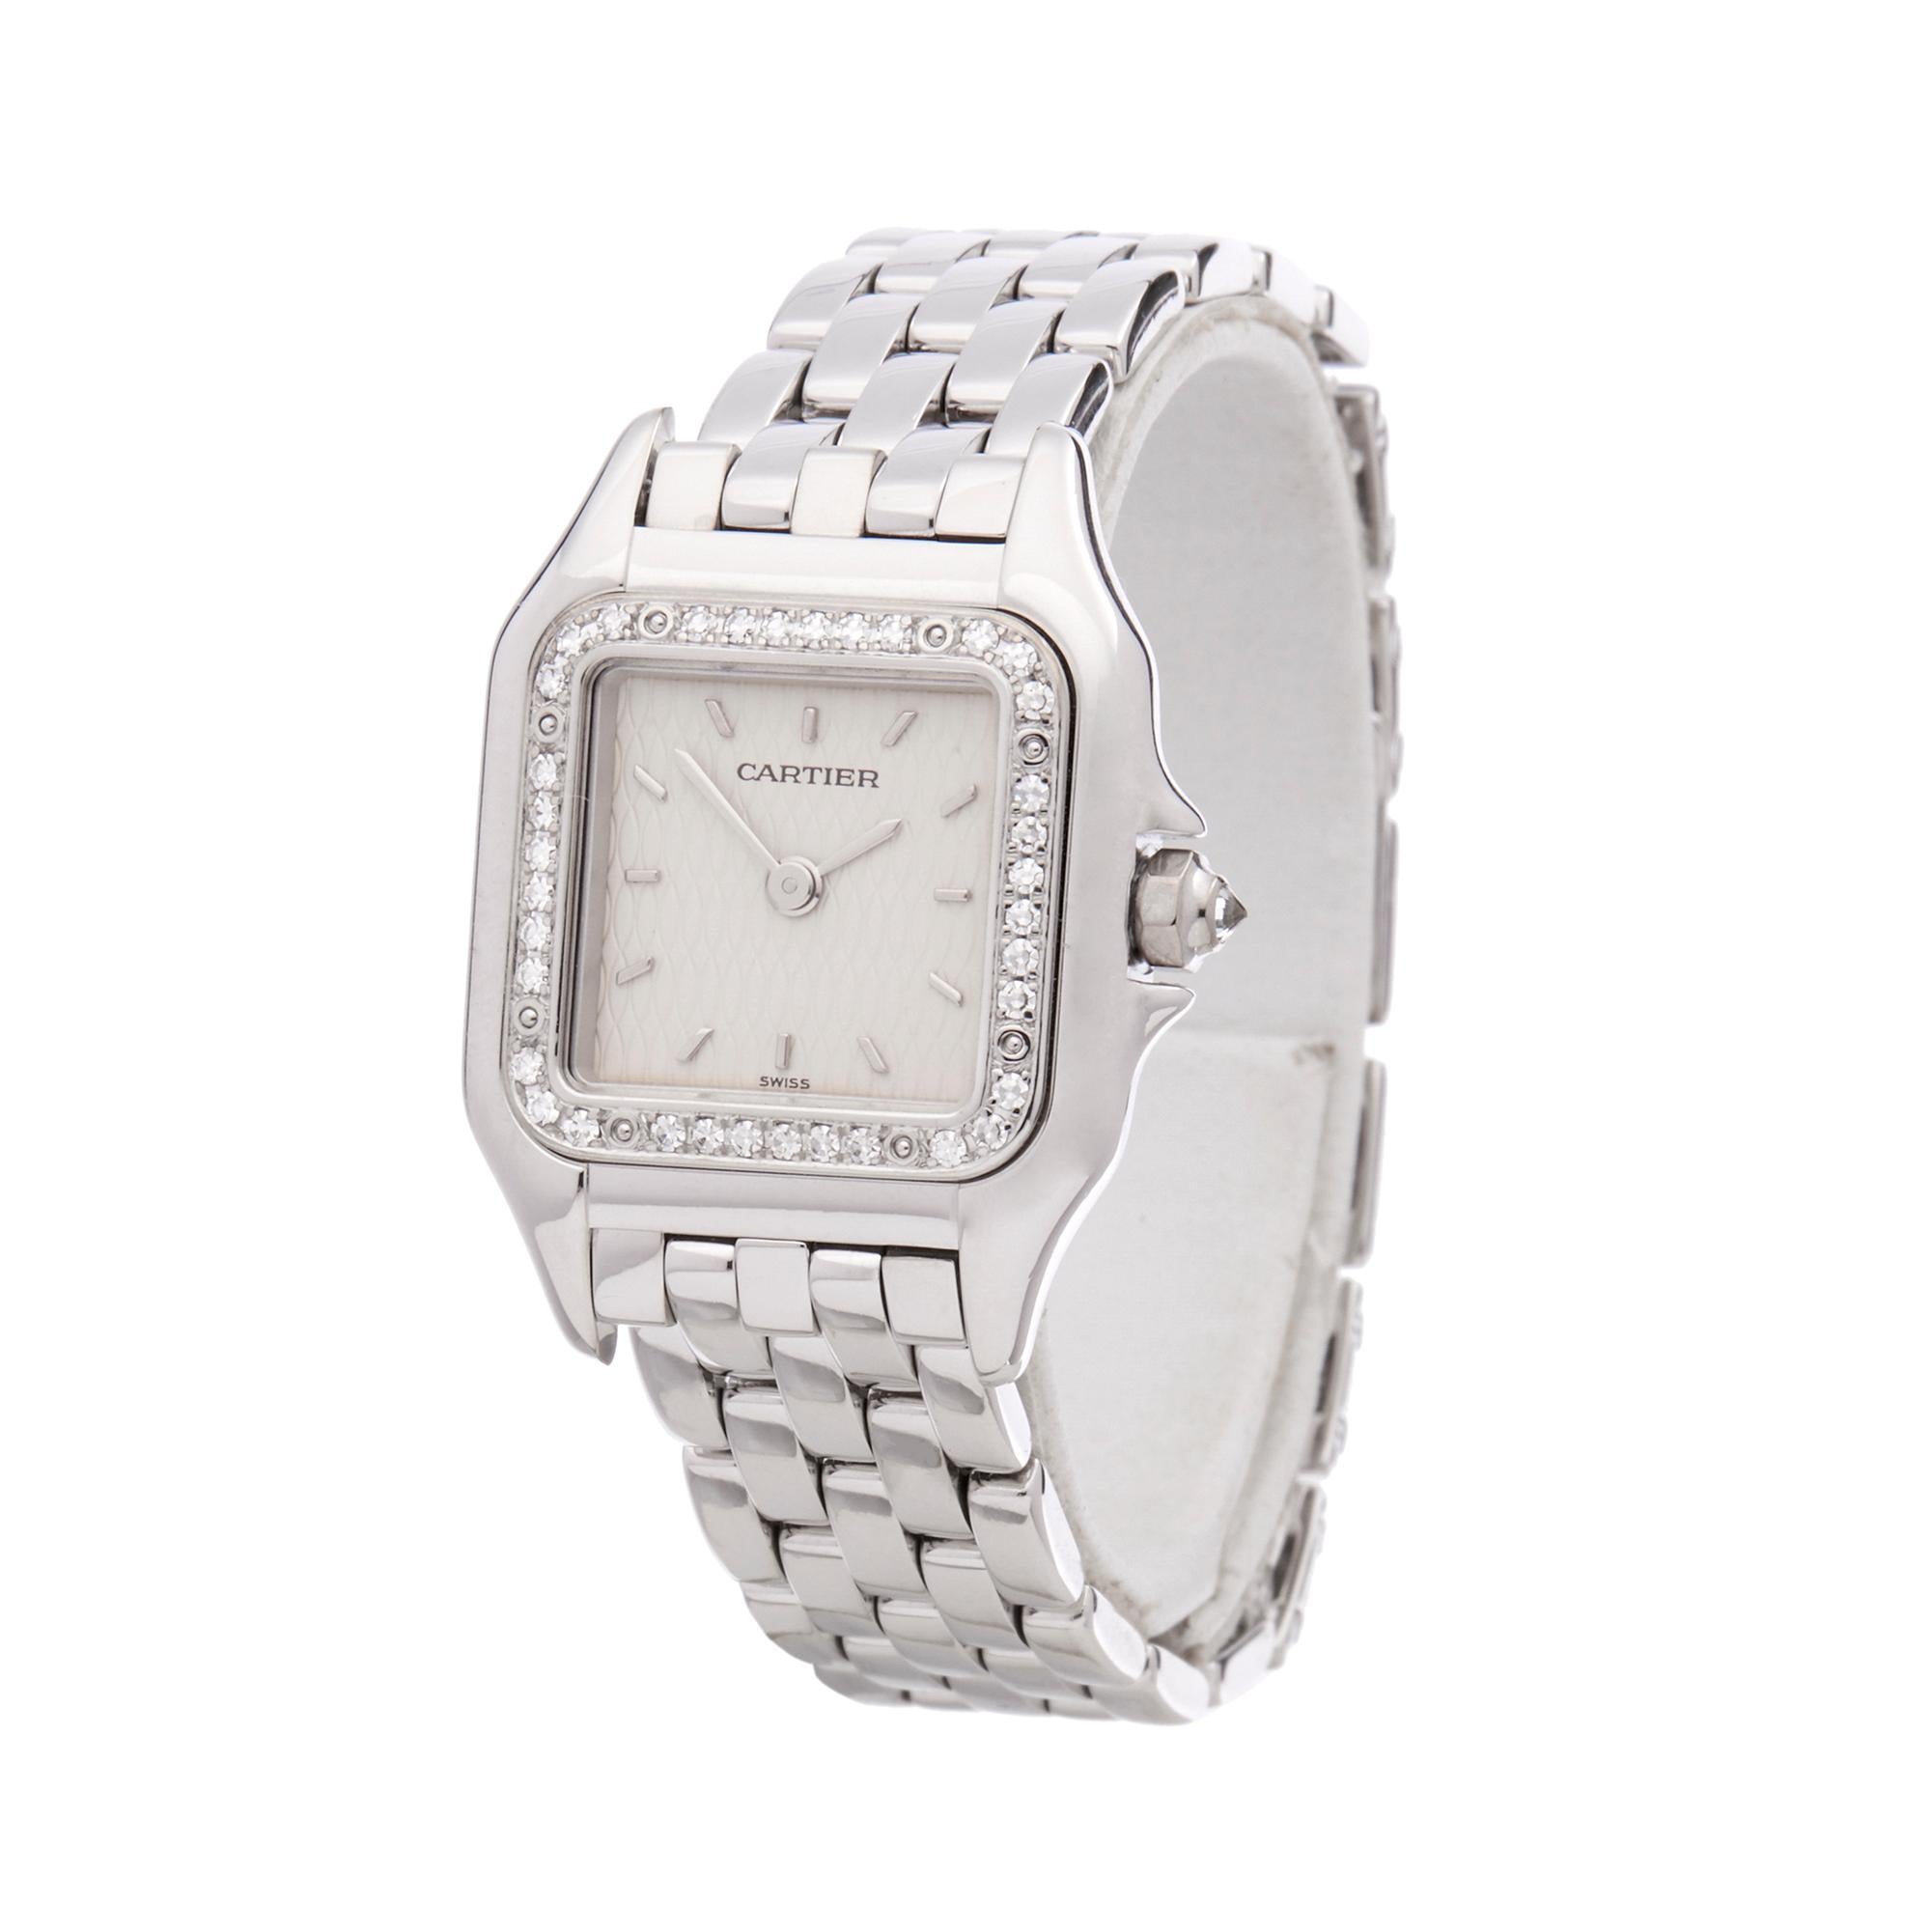 Reference: W5919
Manufacturer: Cartier
Model: Panthère de Cartier
Model Reference: 1660
Age: Circa 2000's
Gender: Women's
Box and Papers: Box, Manuals, Guarantee, Service Pouch and Service Papers dated 25th April 2019
Dial: White Baton
Glass: